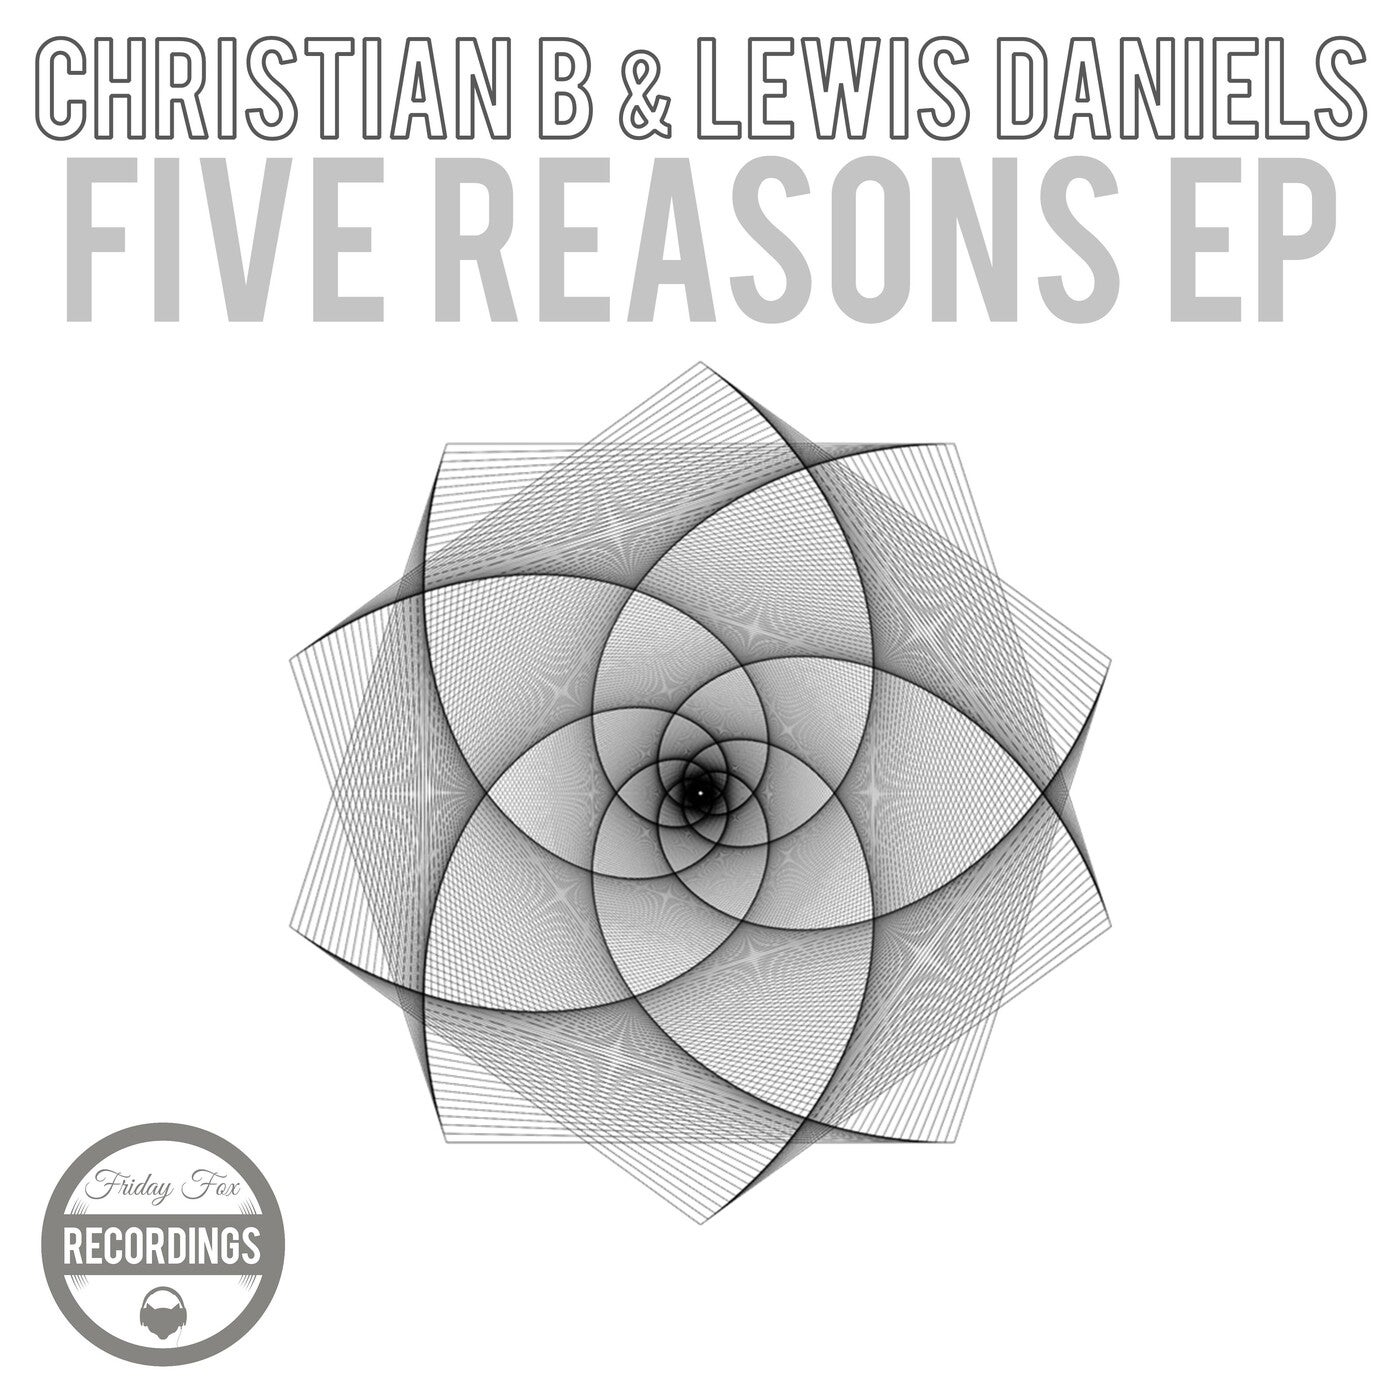 Five Reasons EP from Friday Fox Recordings on Beatport